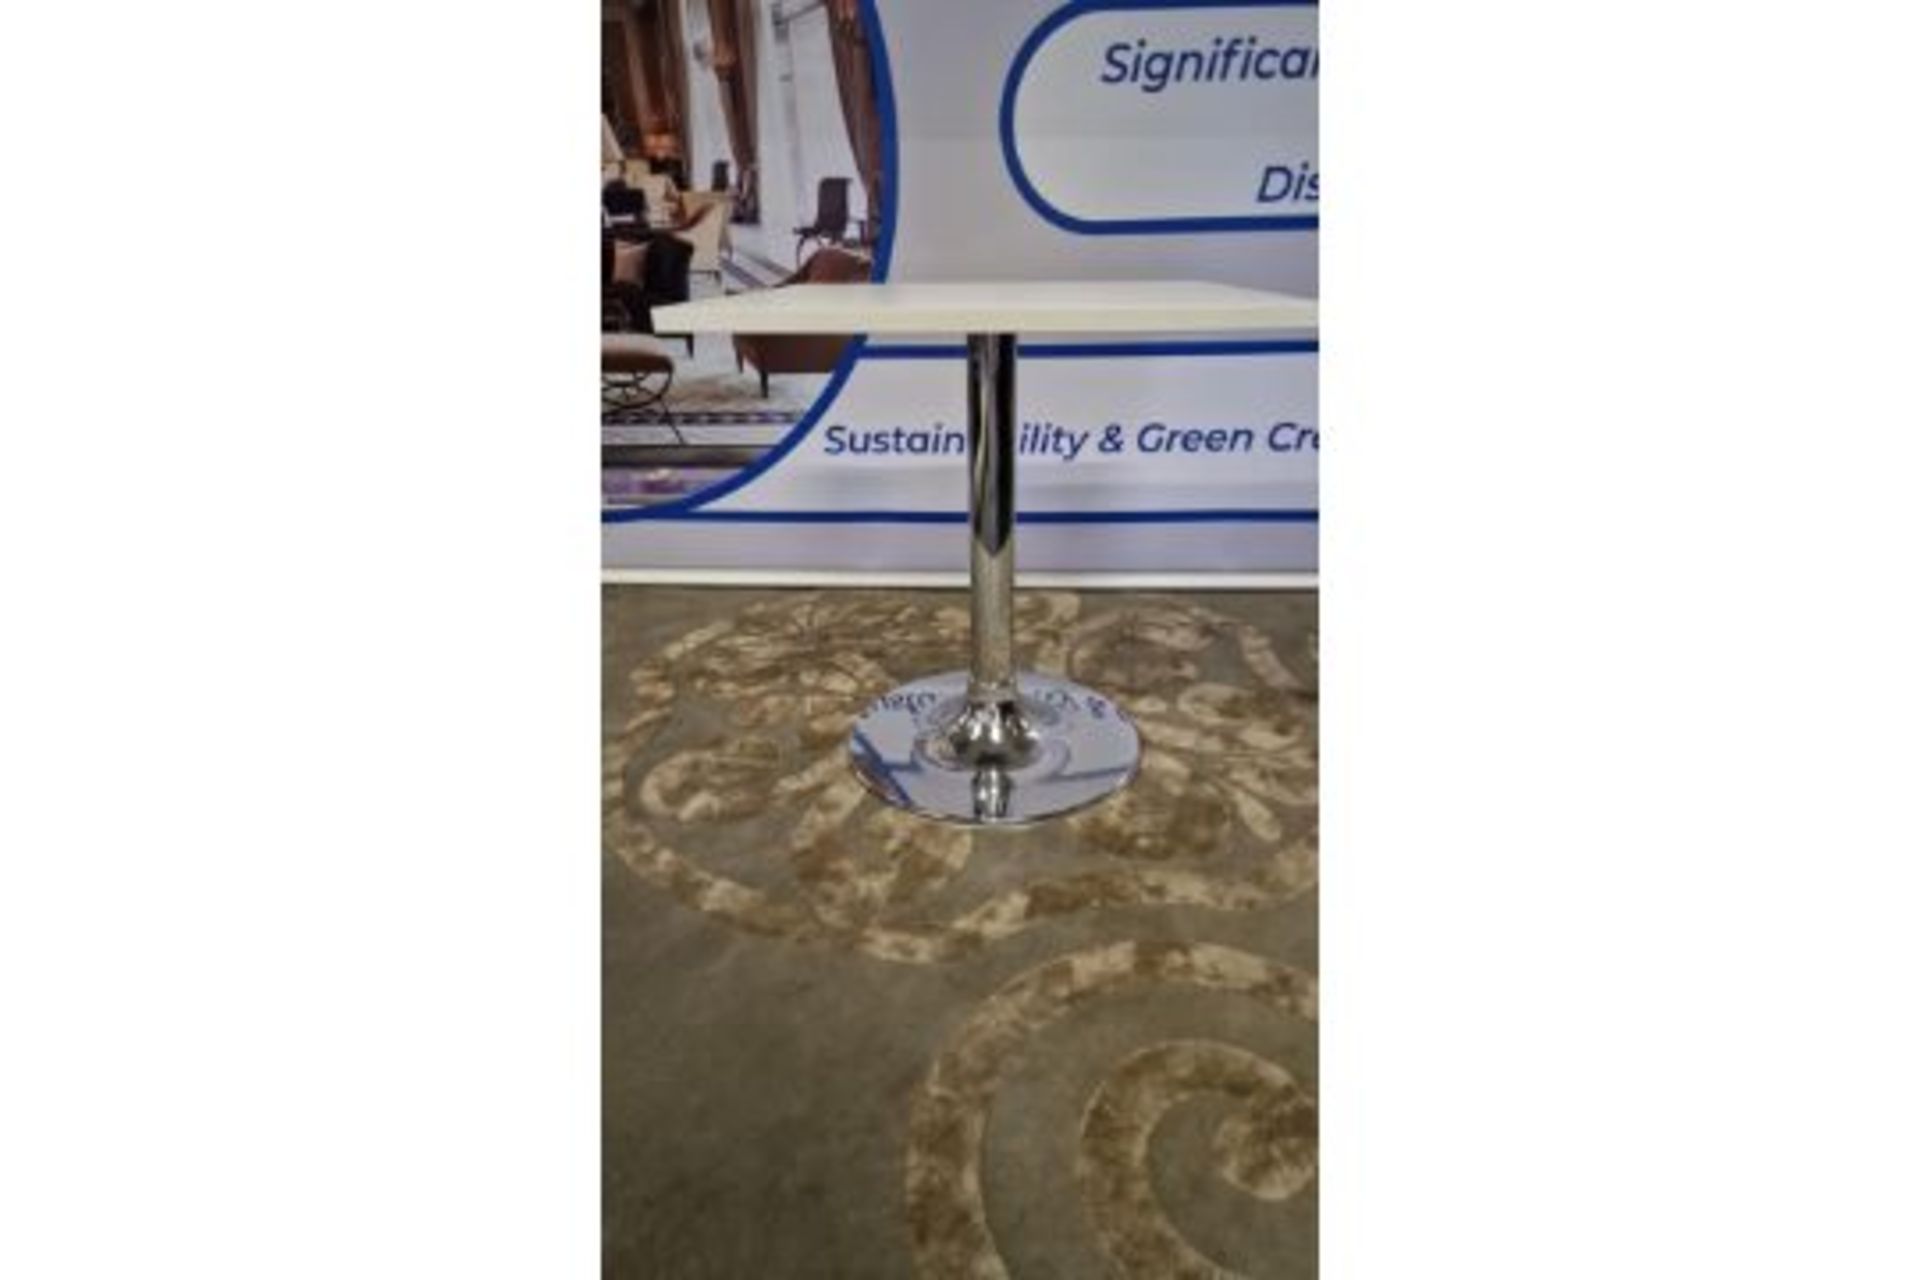 Bistro Table The Bontempi Bistro Table Features A Sleek Stainless Steel Pedestal And A Chalk White - Image 3 of 3